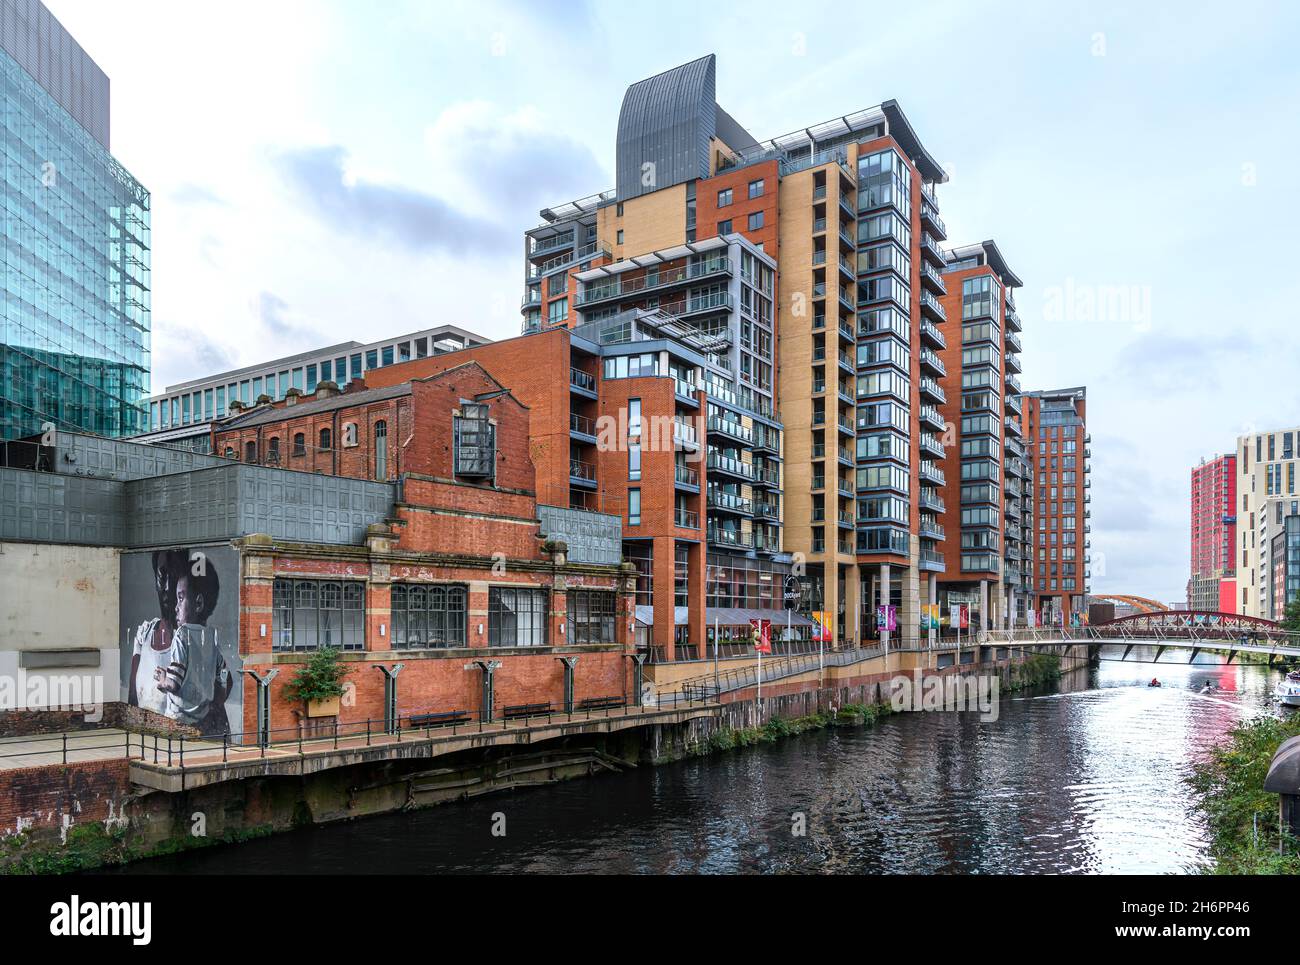 Spinningfields, Manchester. Smart new apartment buildings on the River Irwell. The Peterloo mural by Axel Void is at the People's History Museum. Stock Photo